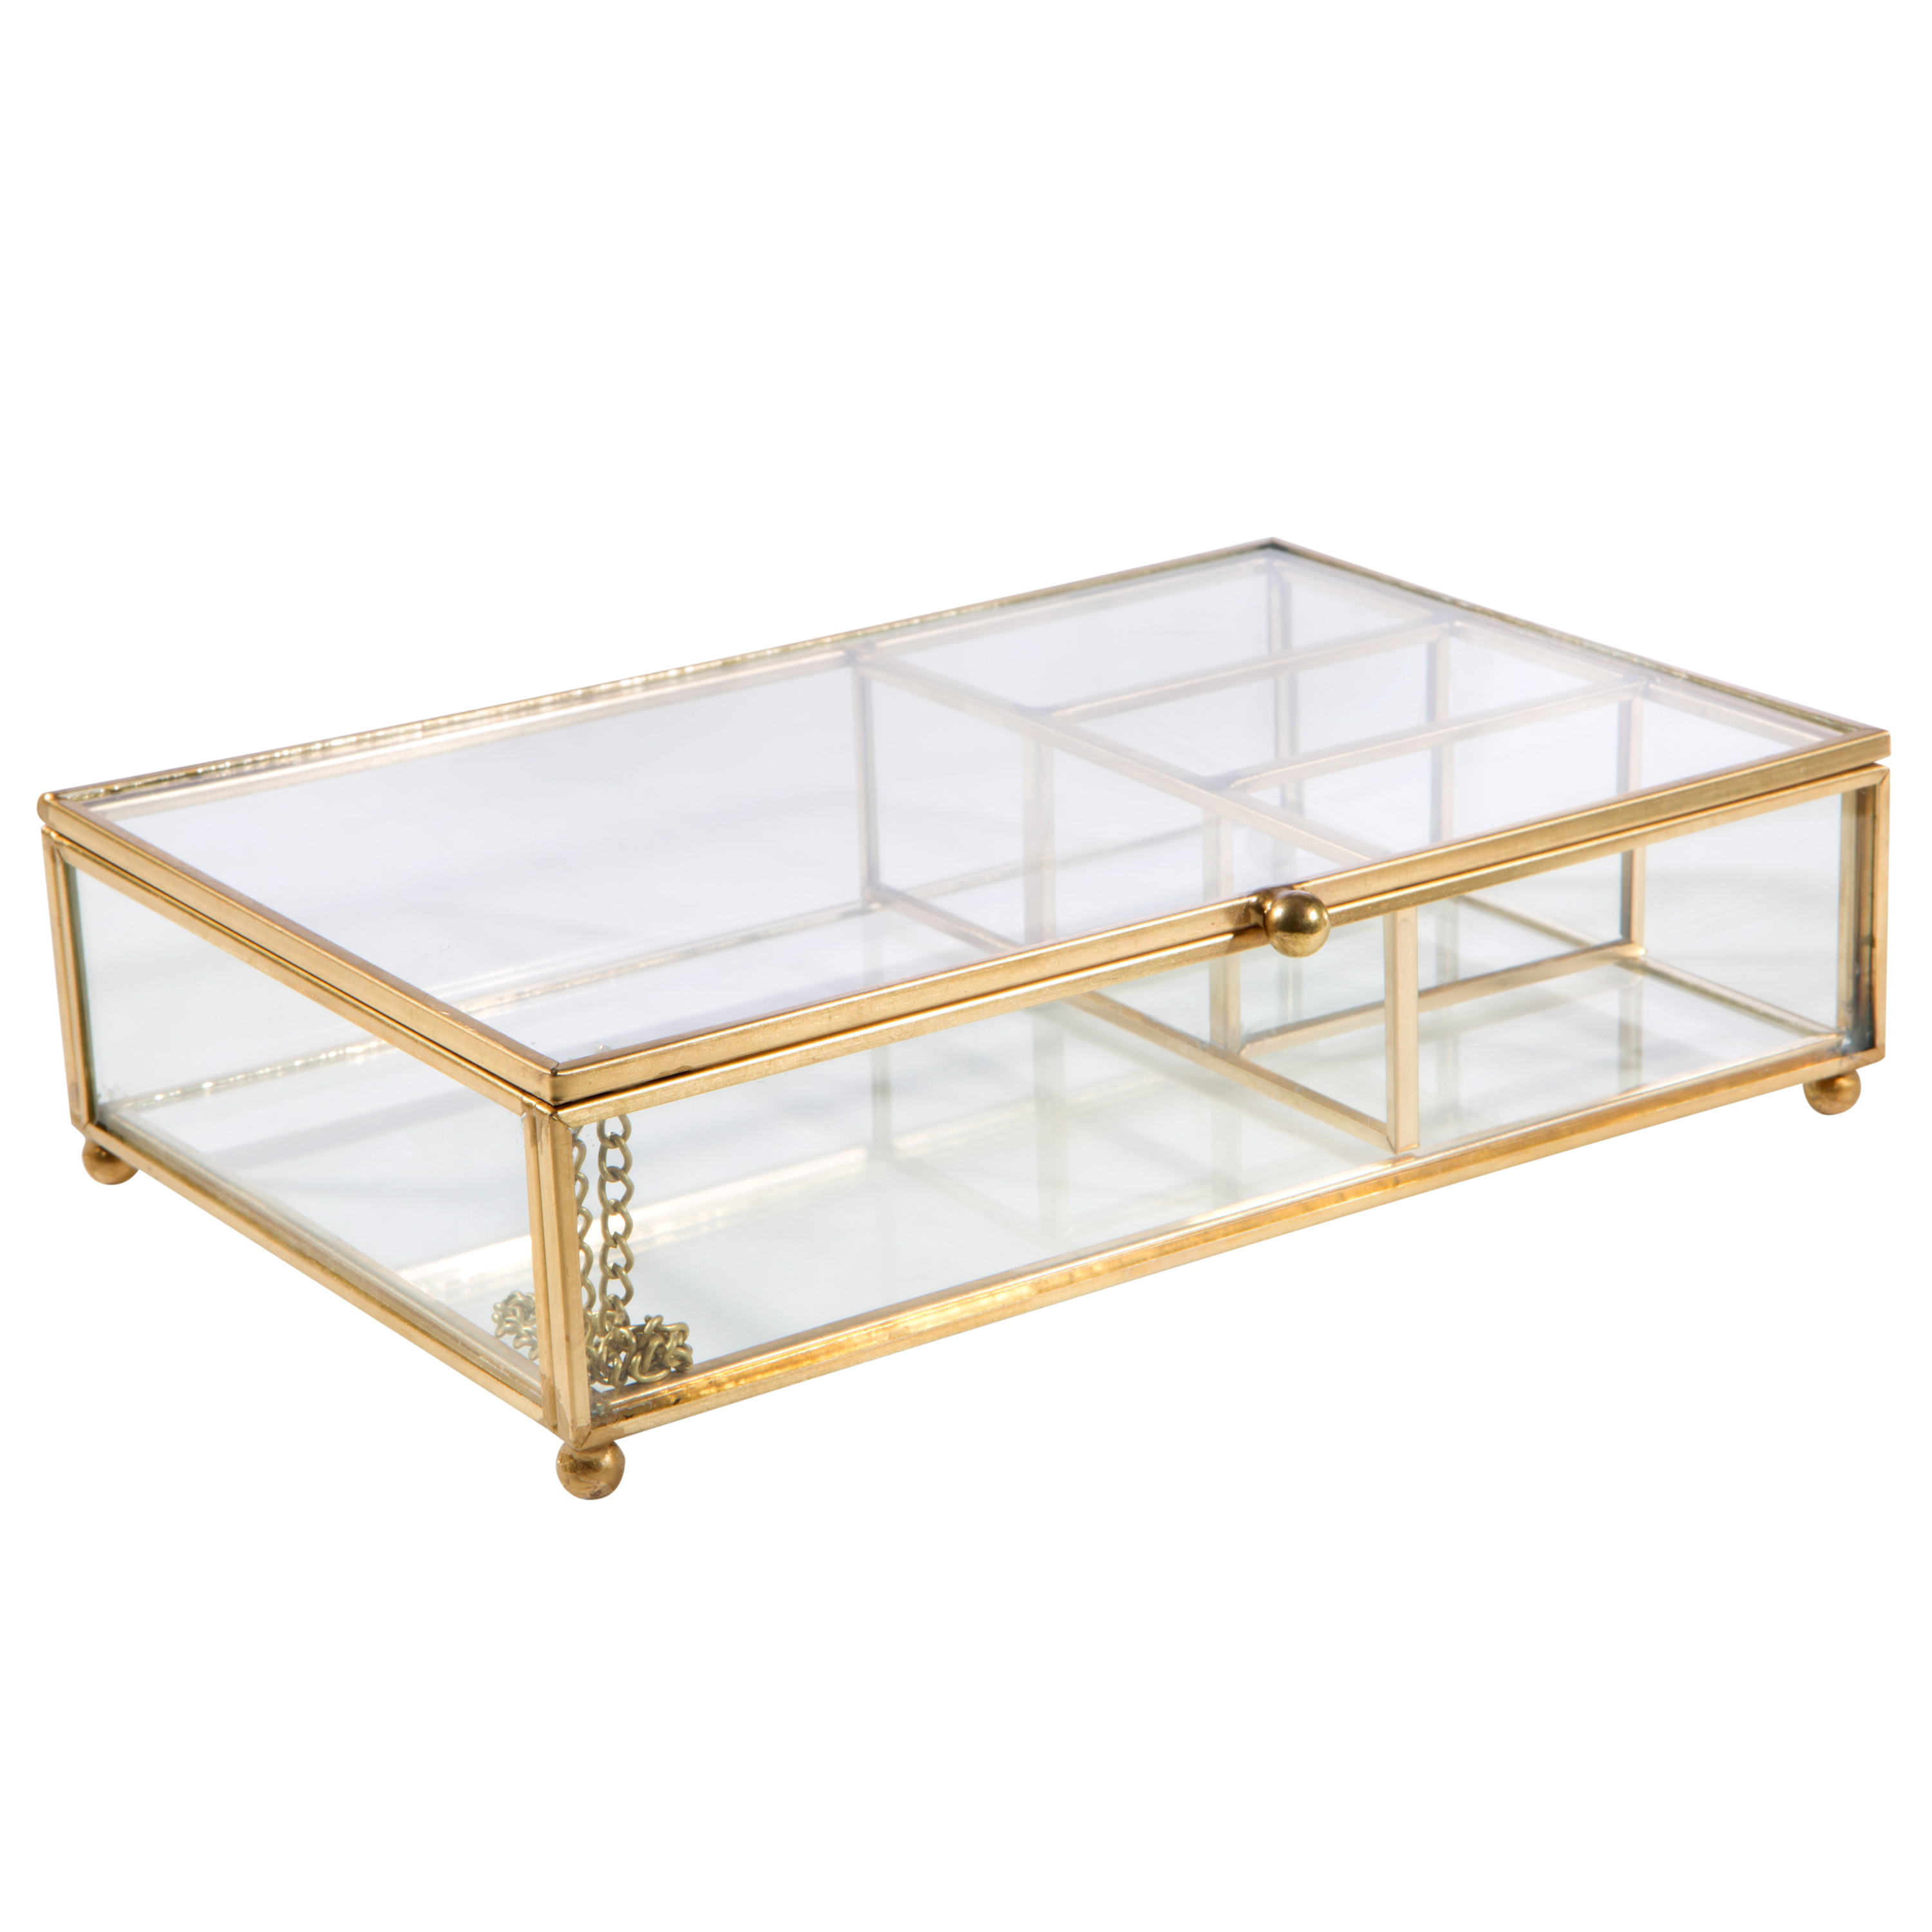 Home Details Vintage 4 Compartment Glass Unisex Cosmetic & Jewelry Keepsake Box in Gold - image 1 of 4